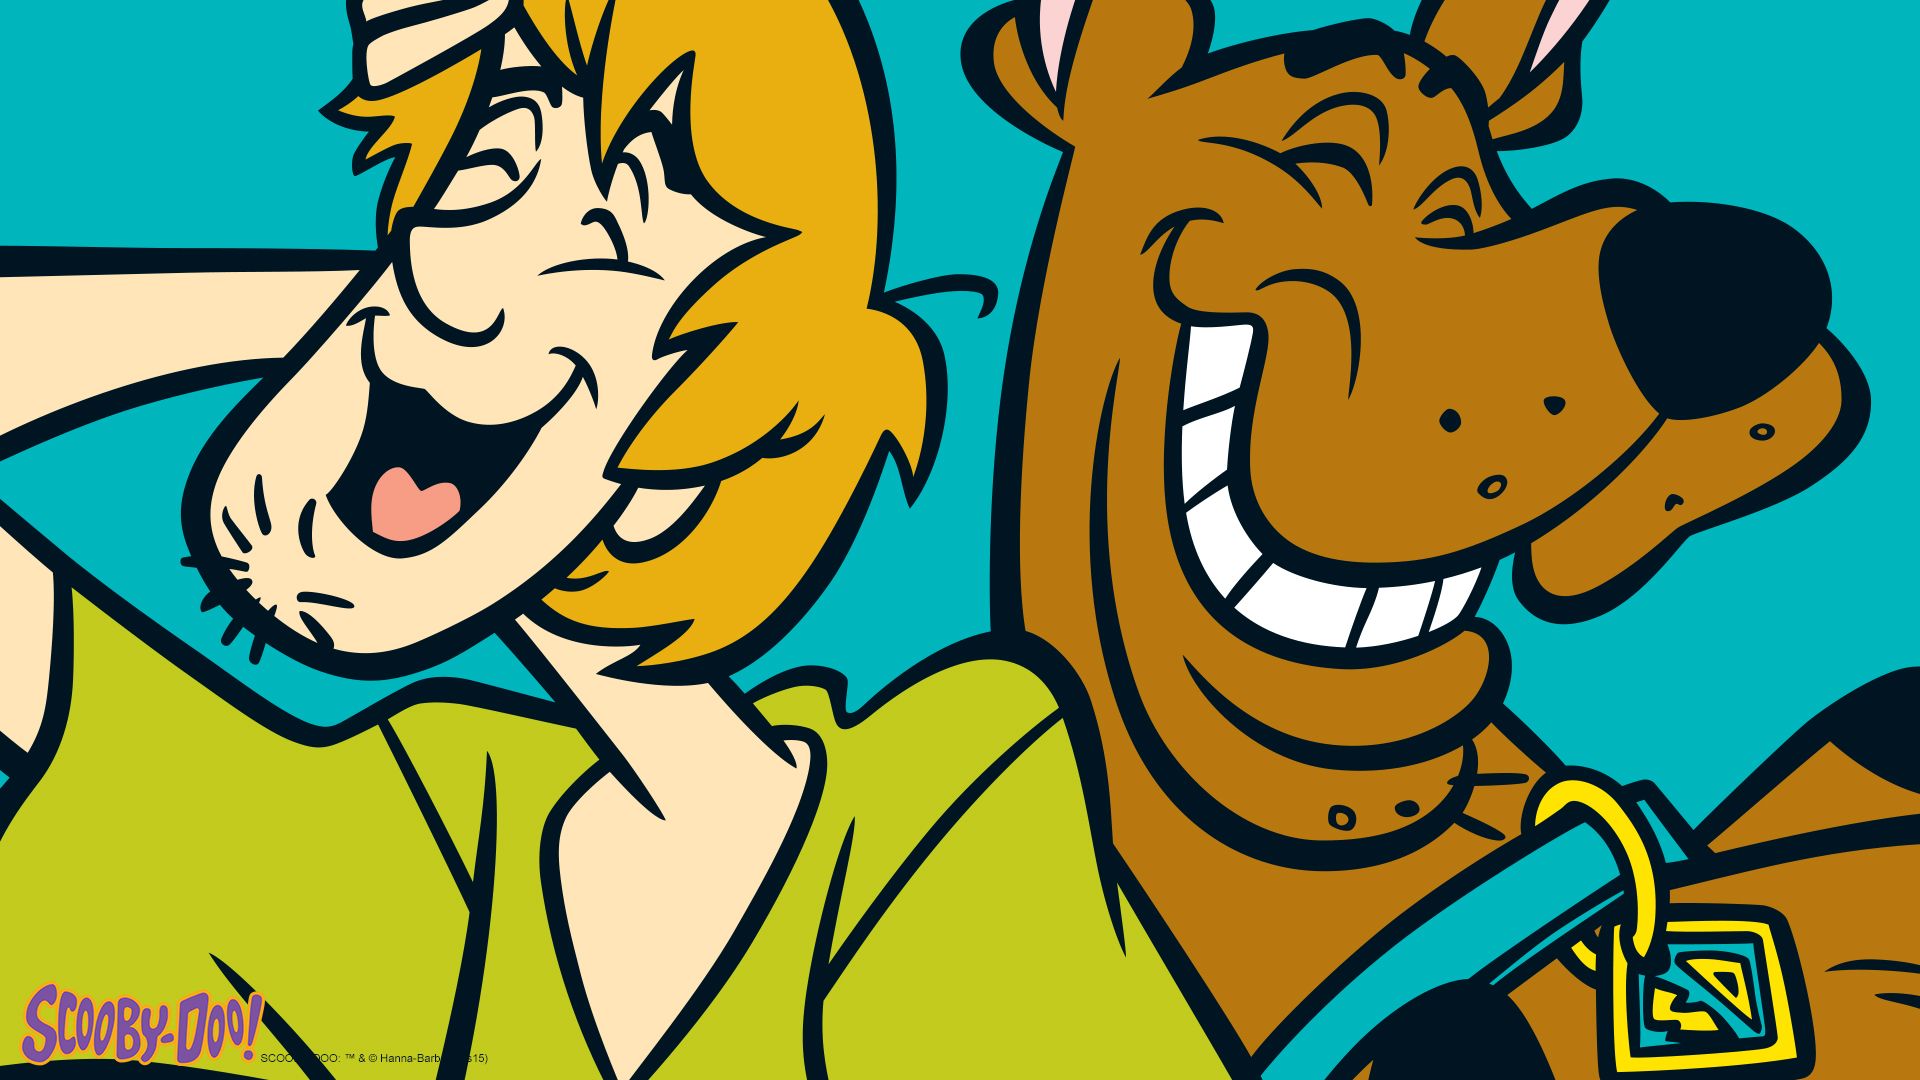 Funny Scooby And Shaggy Wallpaper Scooby Doo  फट शयर